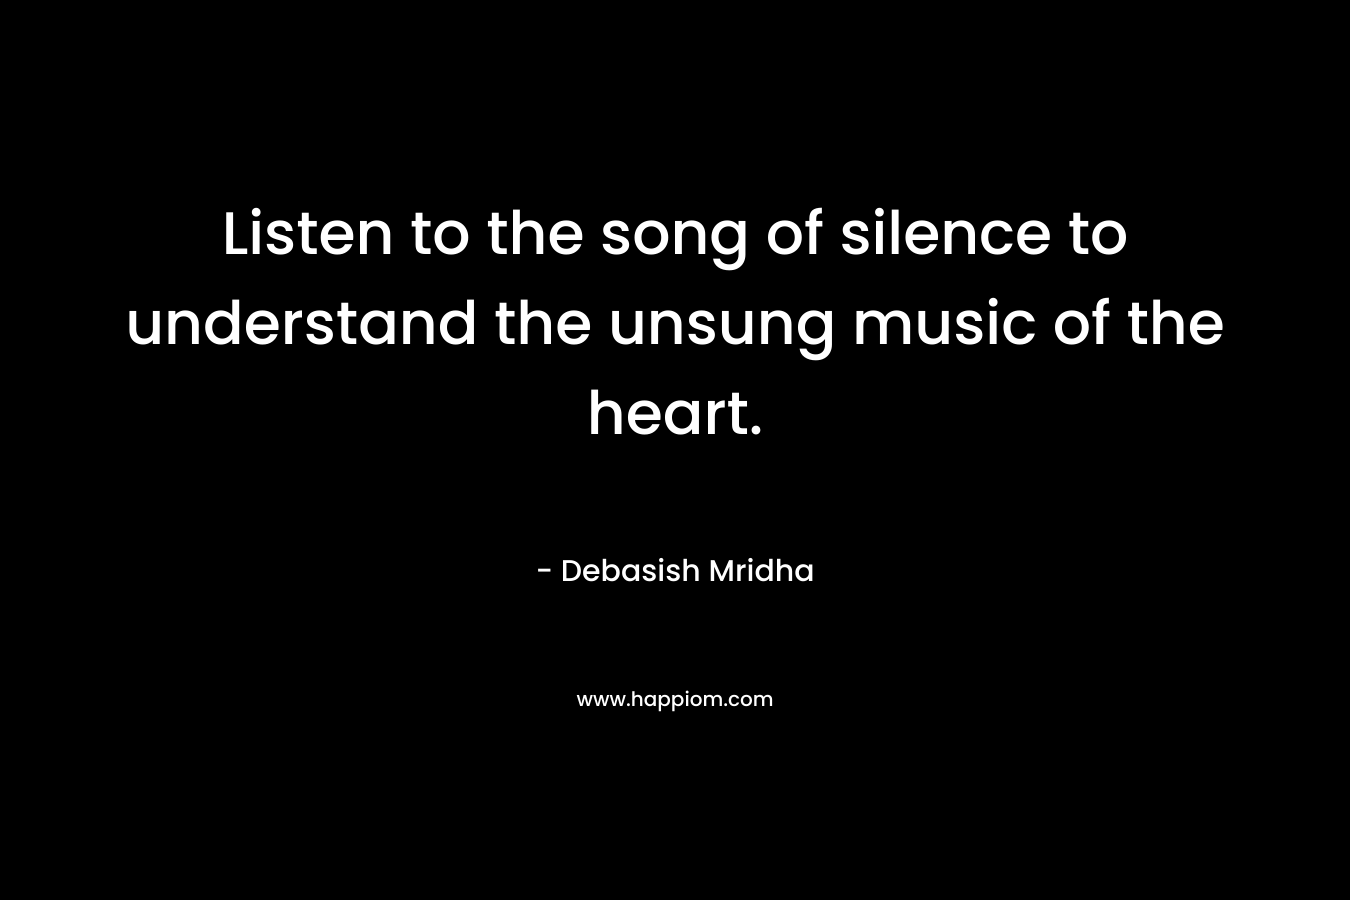 Listen to the song of silence to understand the unsung music of the heart.